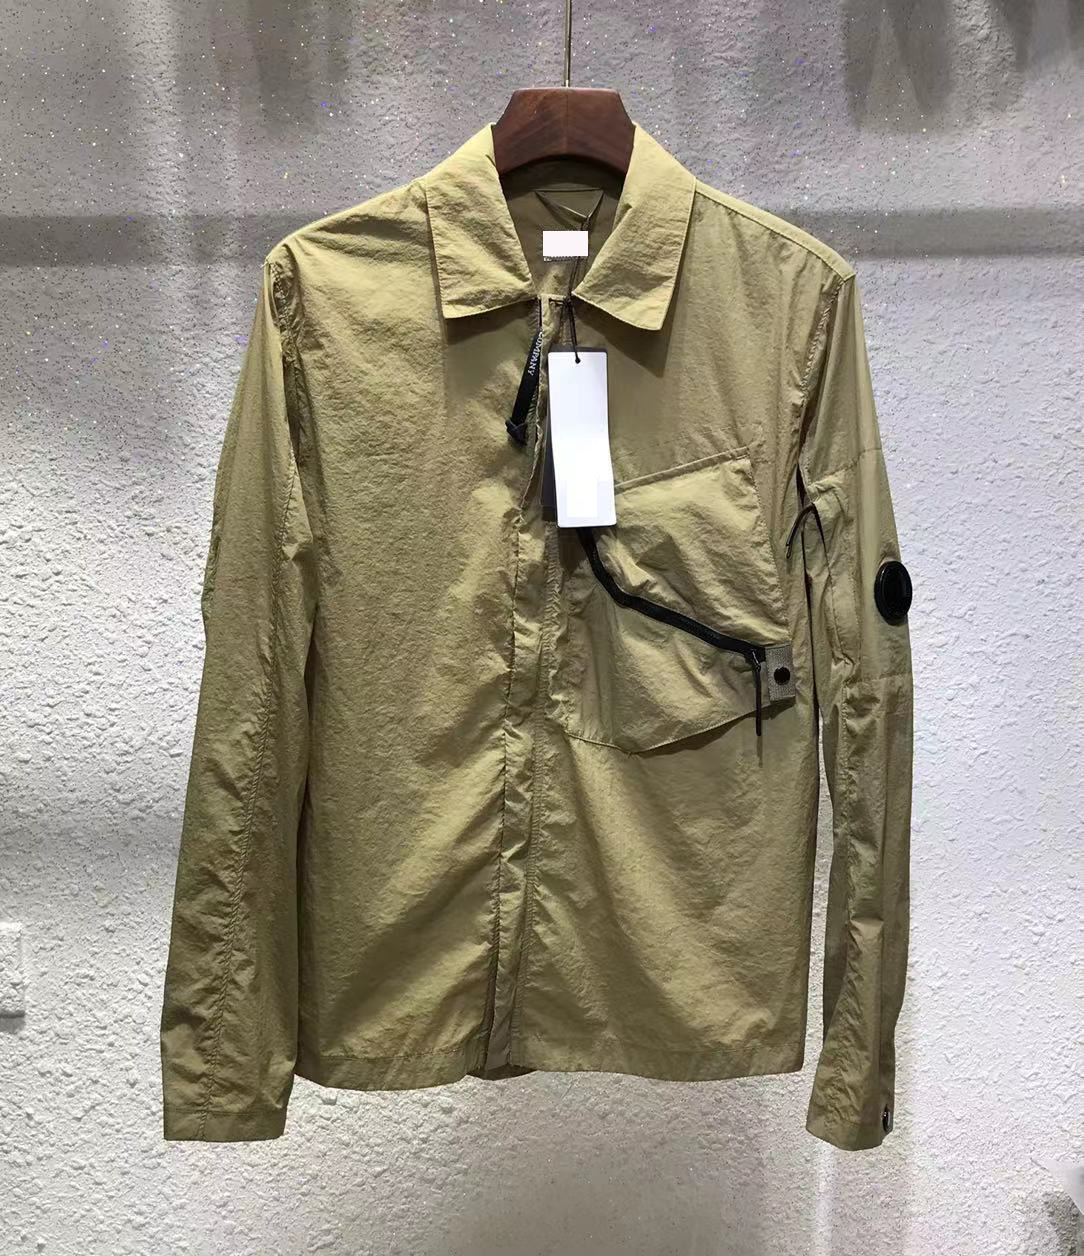 

C P topstoney konng gonng spring and summer thin jacket fashion brand islandss coat outdoor sun proof windbreaker Sunscreen clothing, Supplement (not shipped separately)